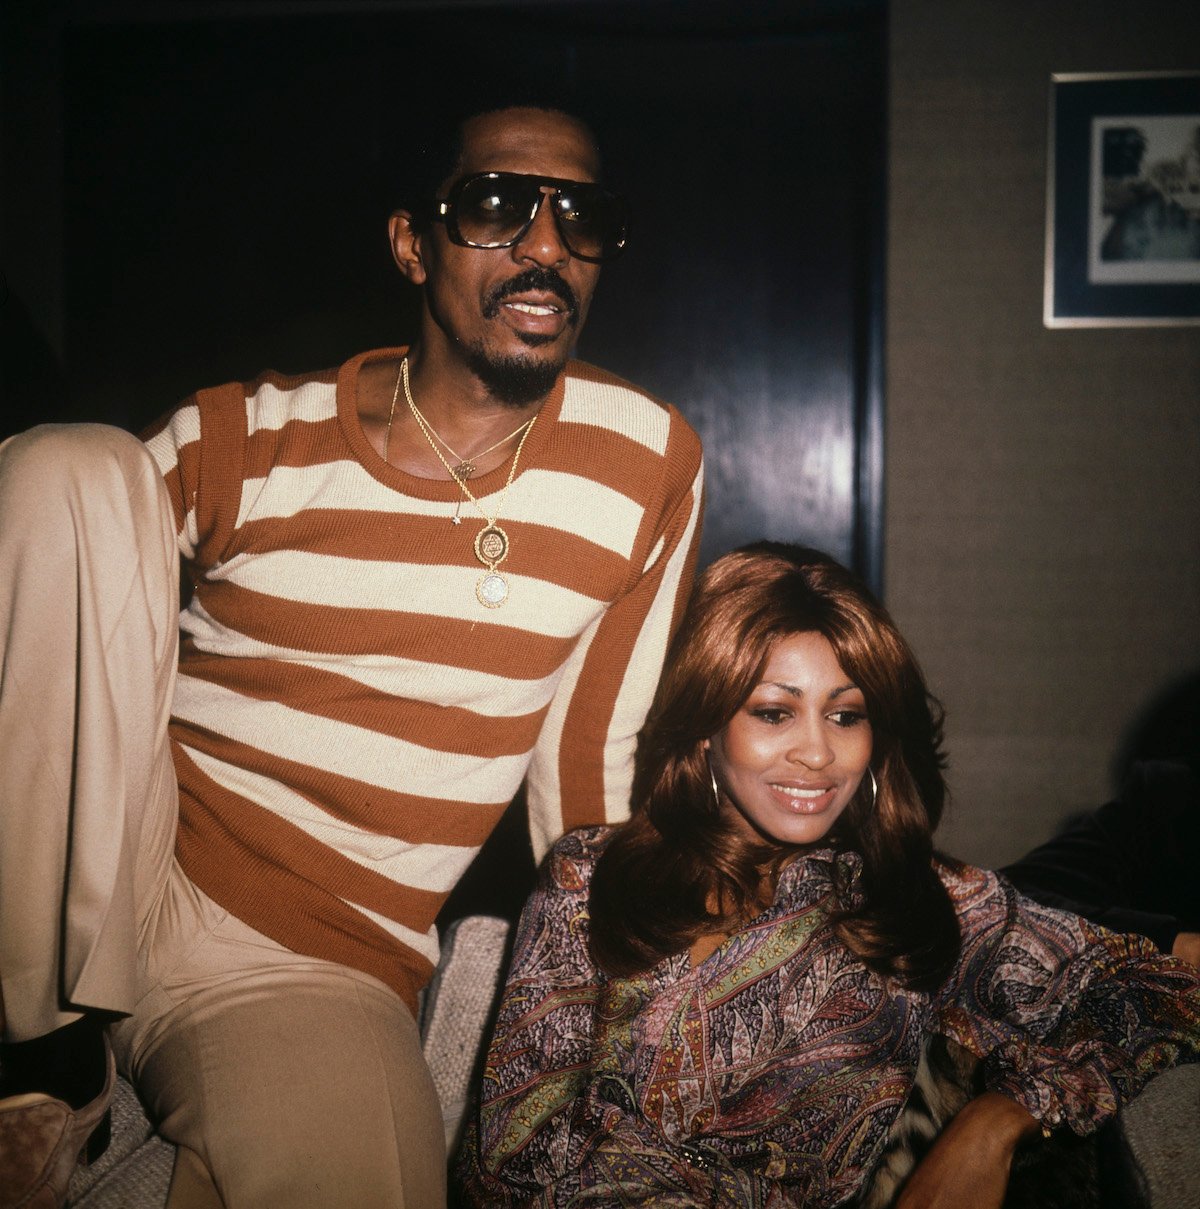 American music duo Tina Turner and Ike Turner (1931-2007) of the Ike & Tina Turner Revue attend a press interview in London in October 1975. Ike and Tina Turner are due to play one date at the Hammersmith Odeon in London on 24th October | David Redfern/Redferns via Getty Images